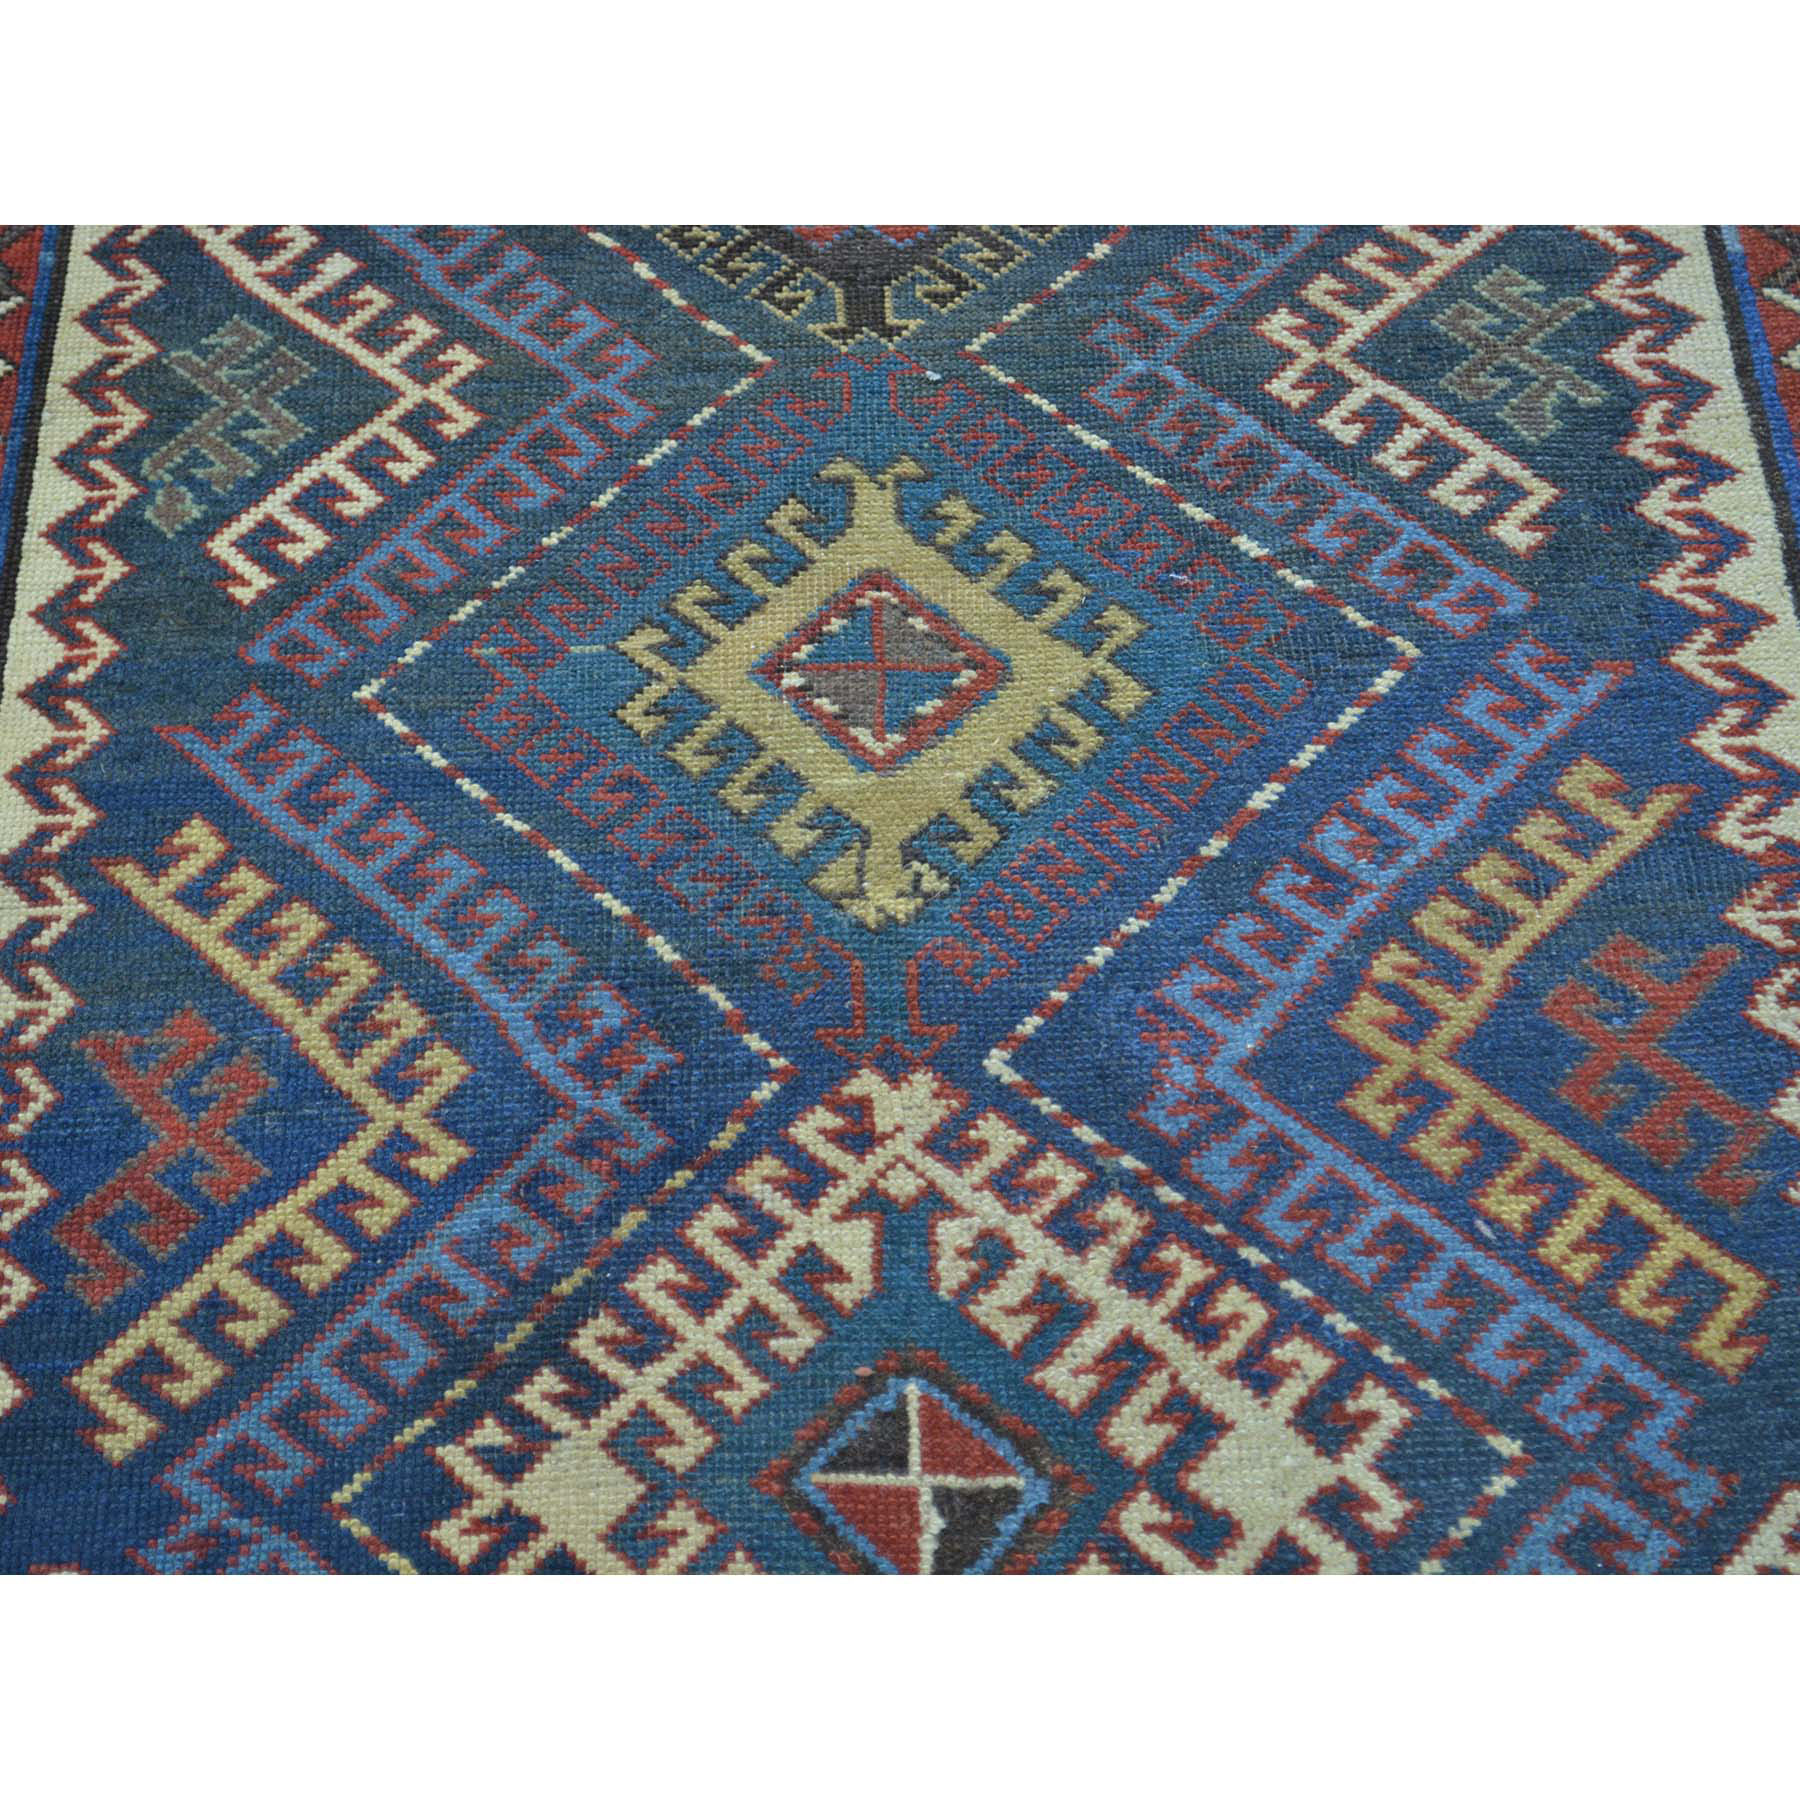 4'x9' Antique Caucasian Talesh Exc Cond Wide Runner Hand Woven Rug 